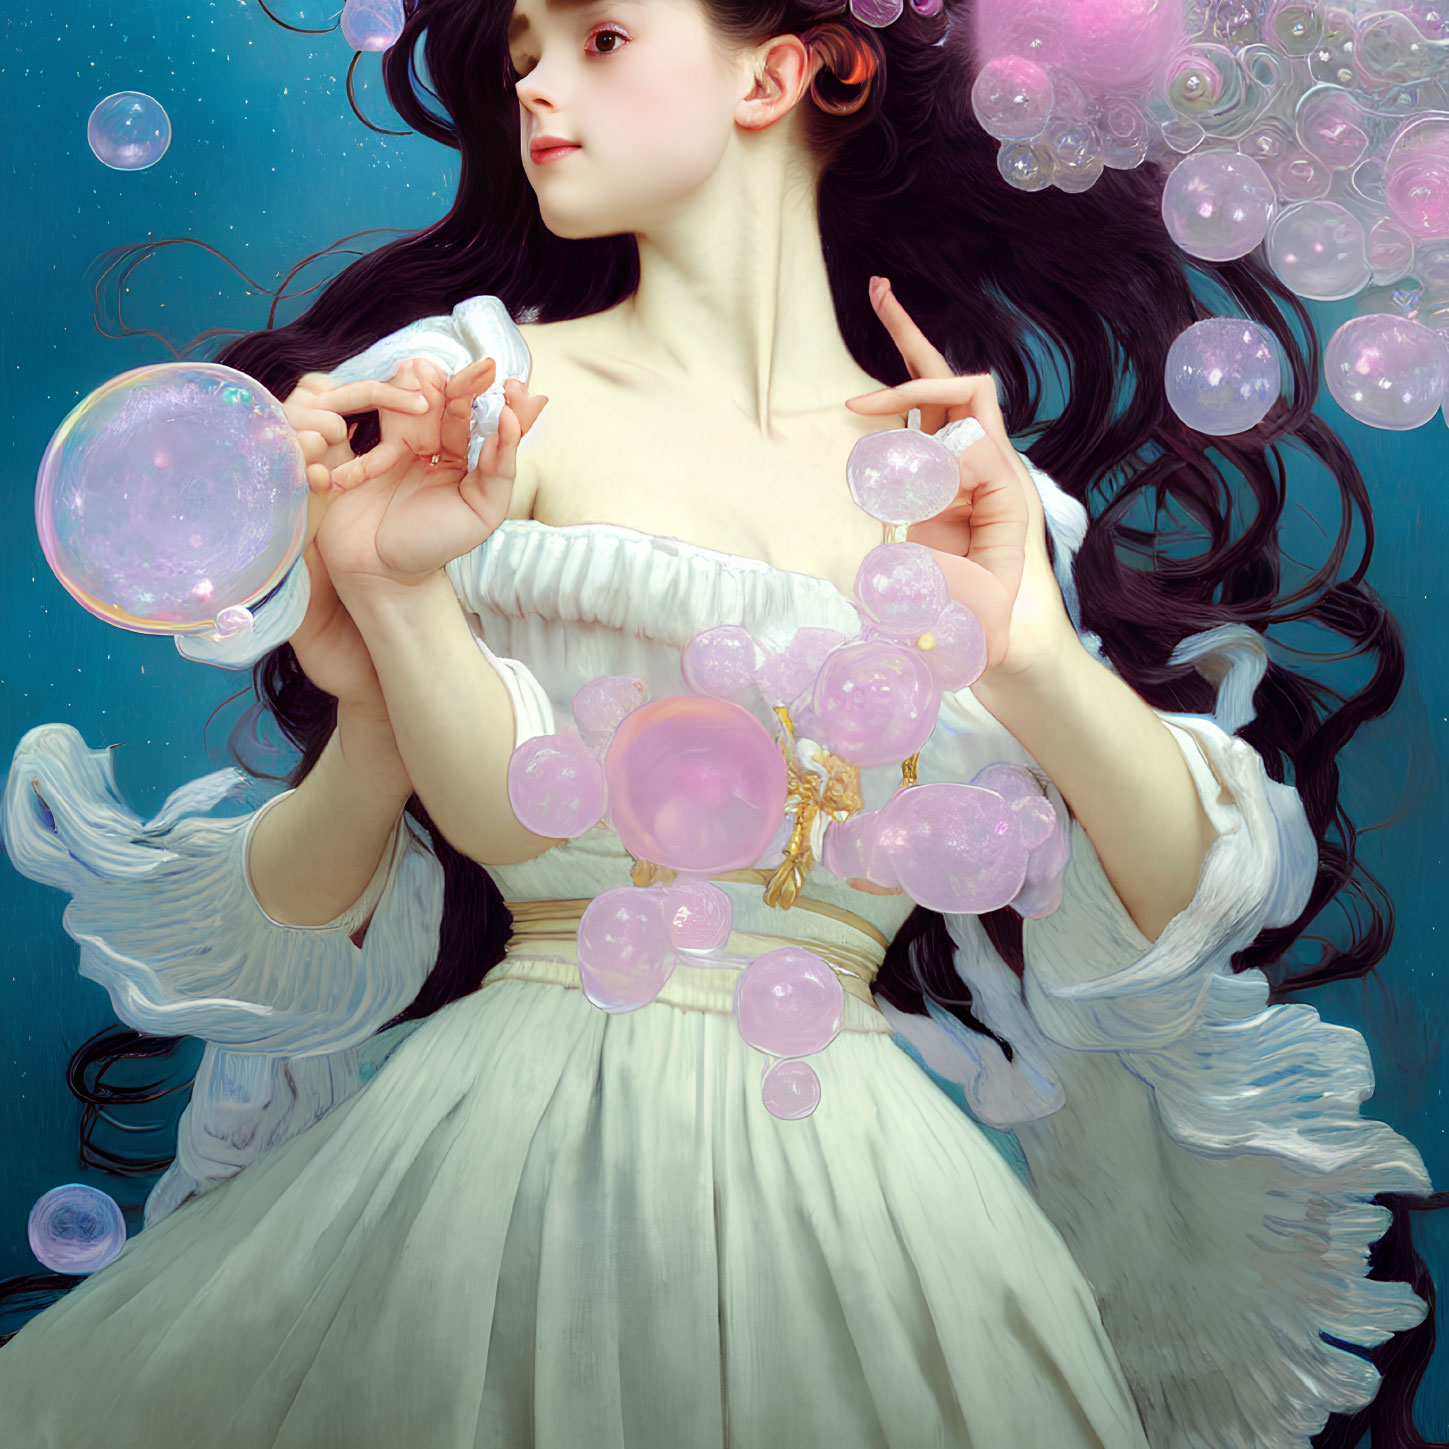 Woman in white dress surrounded by iridescent bubbles on blue backdrop